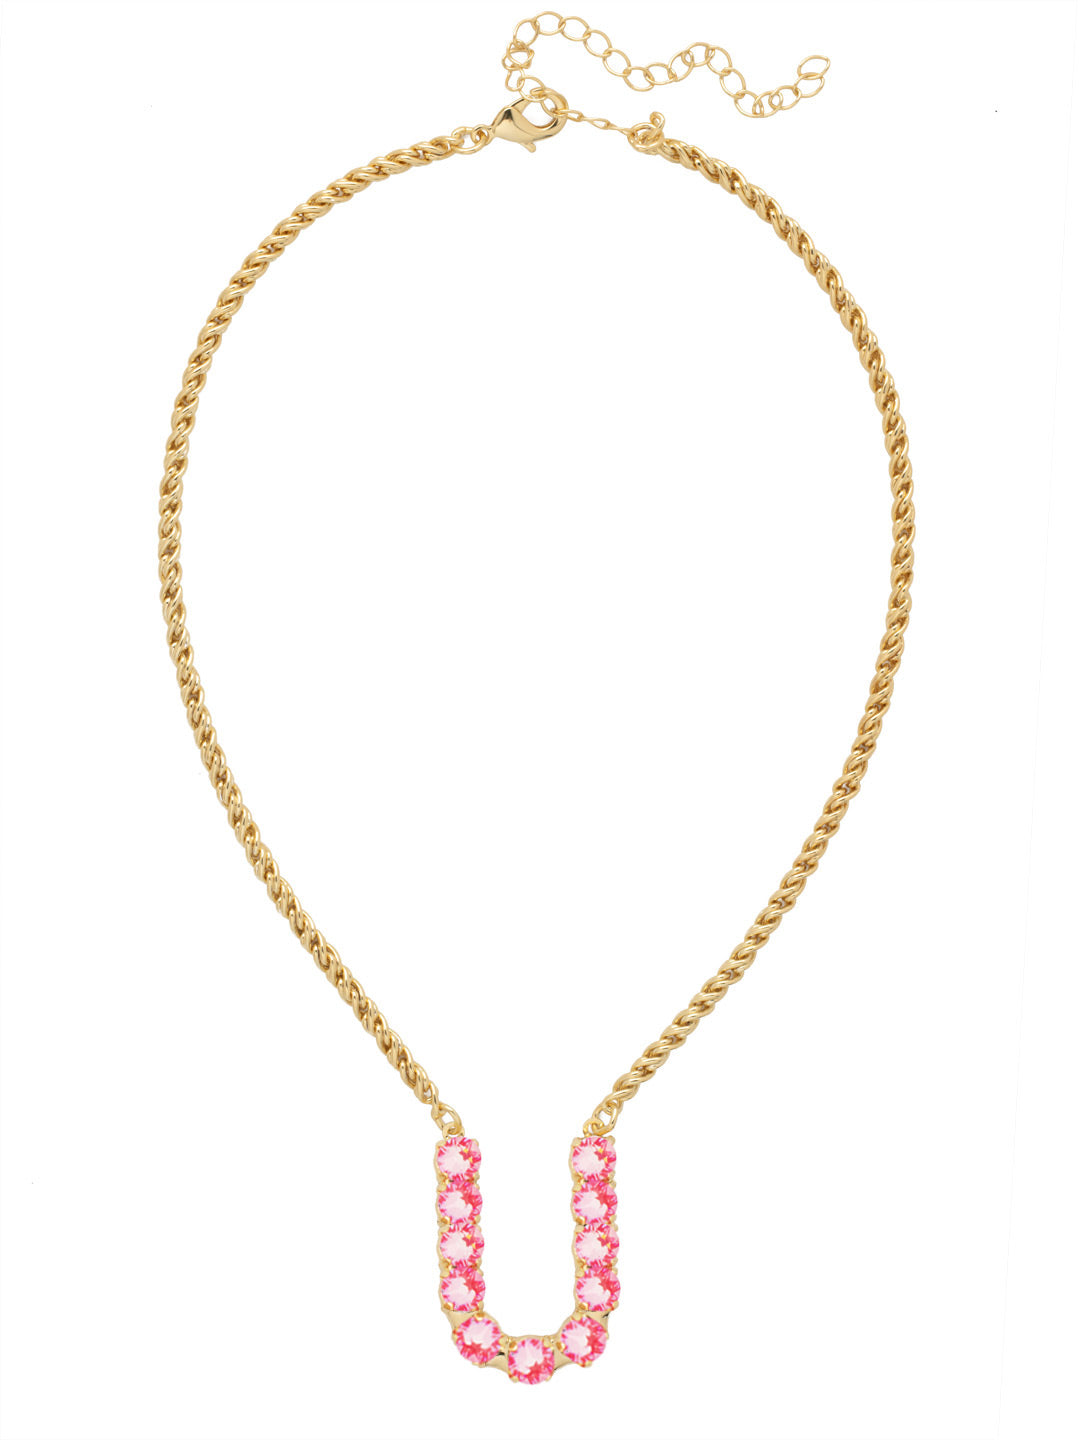 U Initial Rope Pendant Necklace - NFK40BGETP - <p>The Initial Rope Pendant Necklace features a crystal encrusted metal monogram pendant on an adjustable rope chain, secured with a lobster claw clasp. From Sorrelli's Electric Pink collection in our Bright Gold-tone finish.</p>